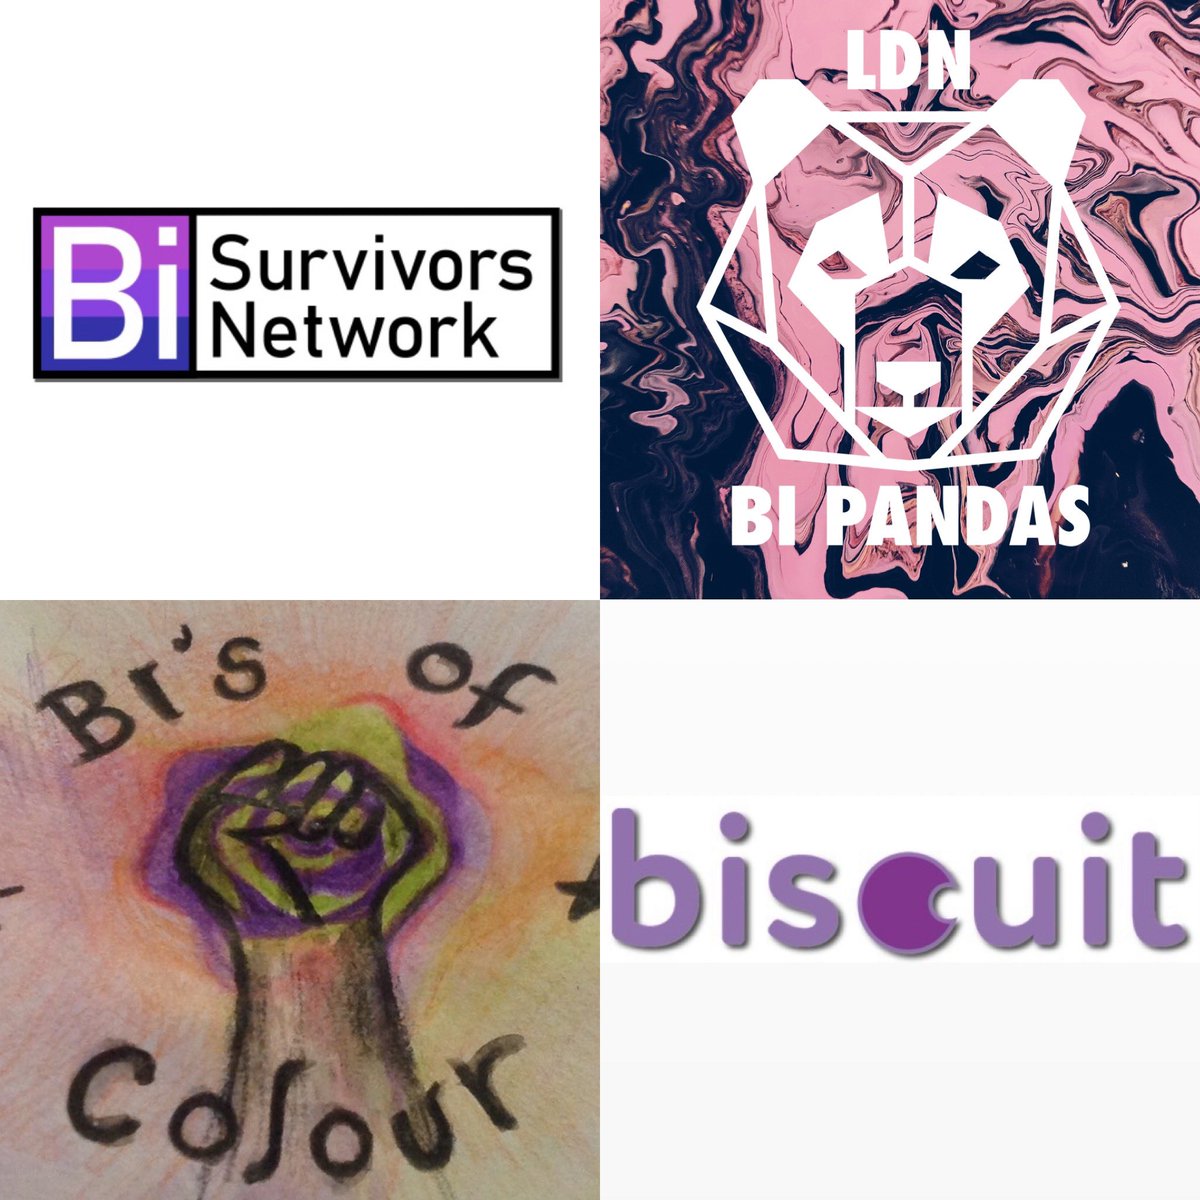 £5 from the sale of each shirt goes to bisexual grassroots organisations! We are happy to be supporting  @NetworkBi,  @LondonBiPandas,  @BisofColour and  @we_are_biscuit! Check out more here! https://rainbowandco.uk/blogs/what-were-saying/celebrating-bisexuality